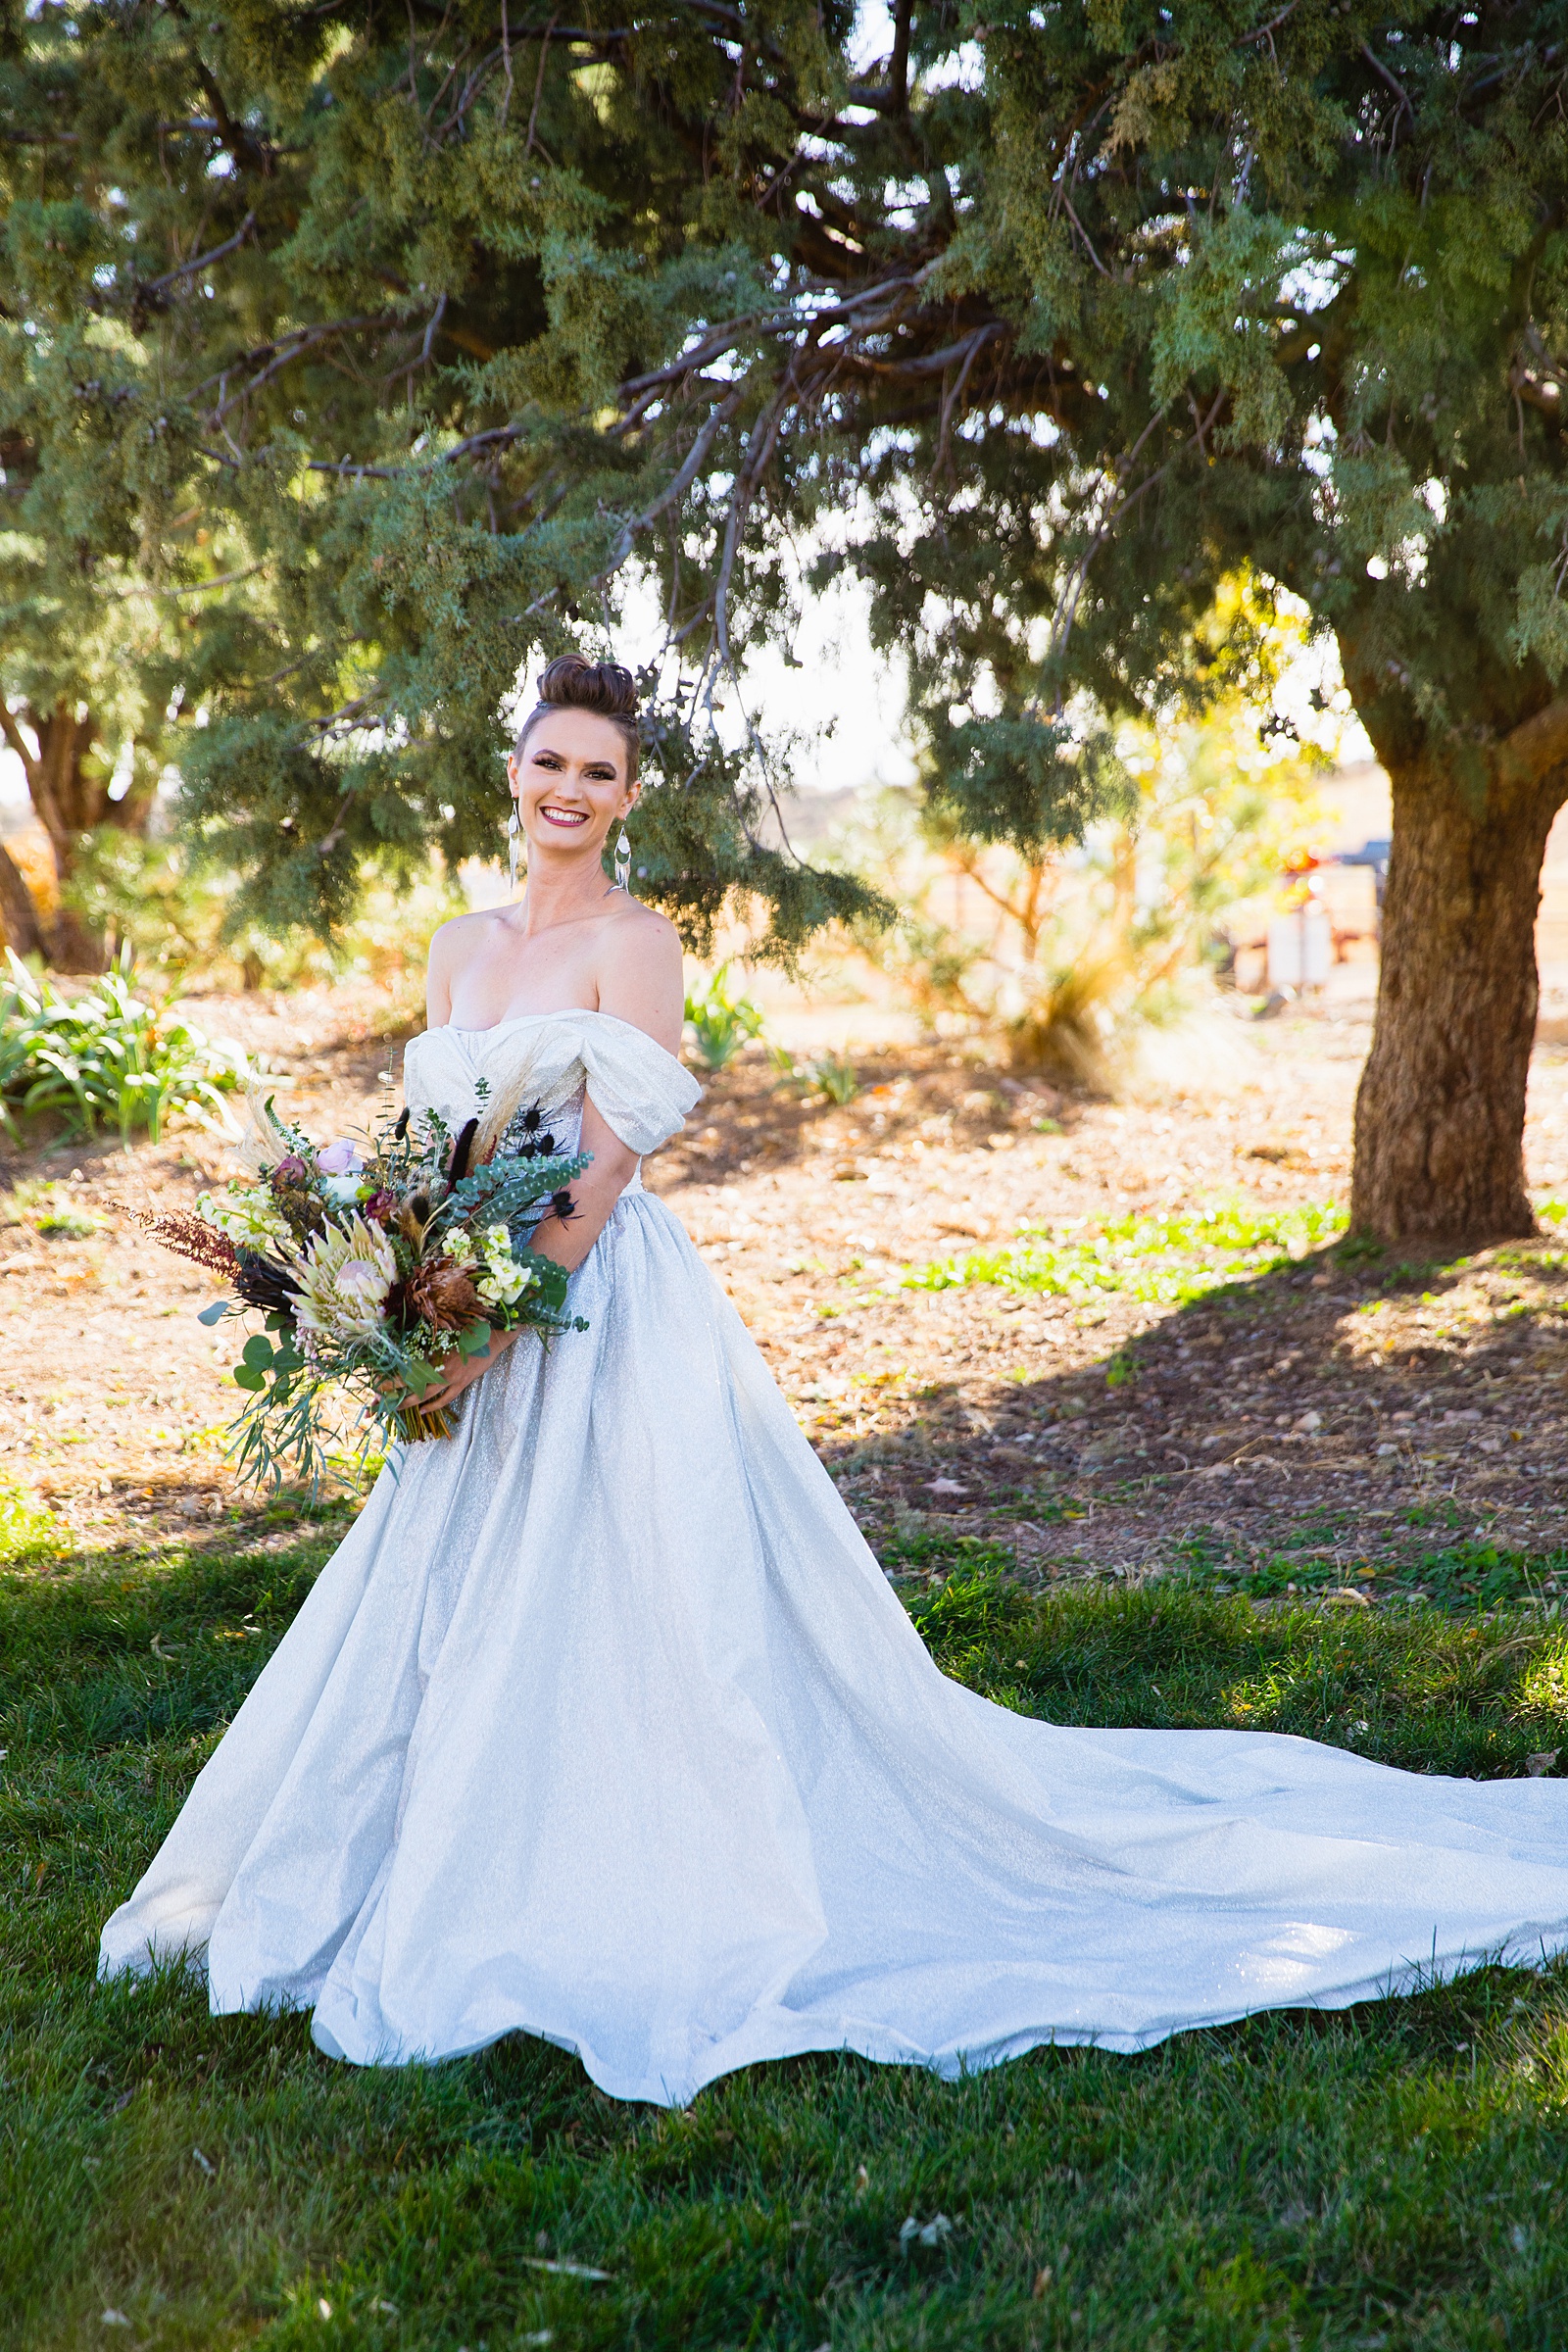 Bride's sparkly Cinderella inspired wedding dress for her Mortimer Farms wedding by PMA Photography.